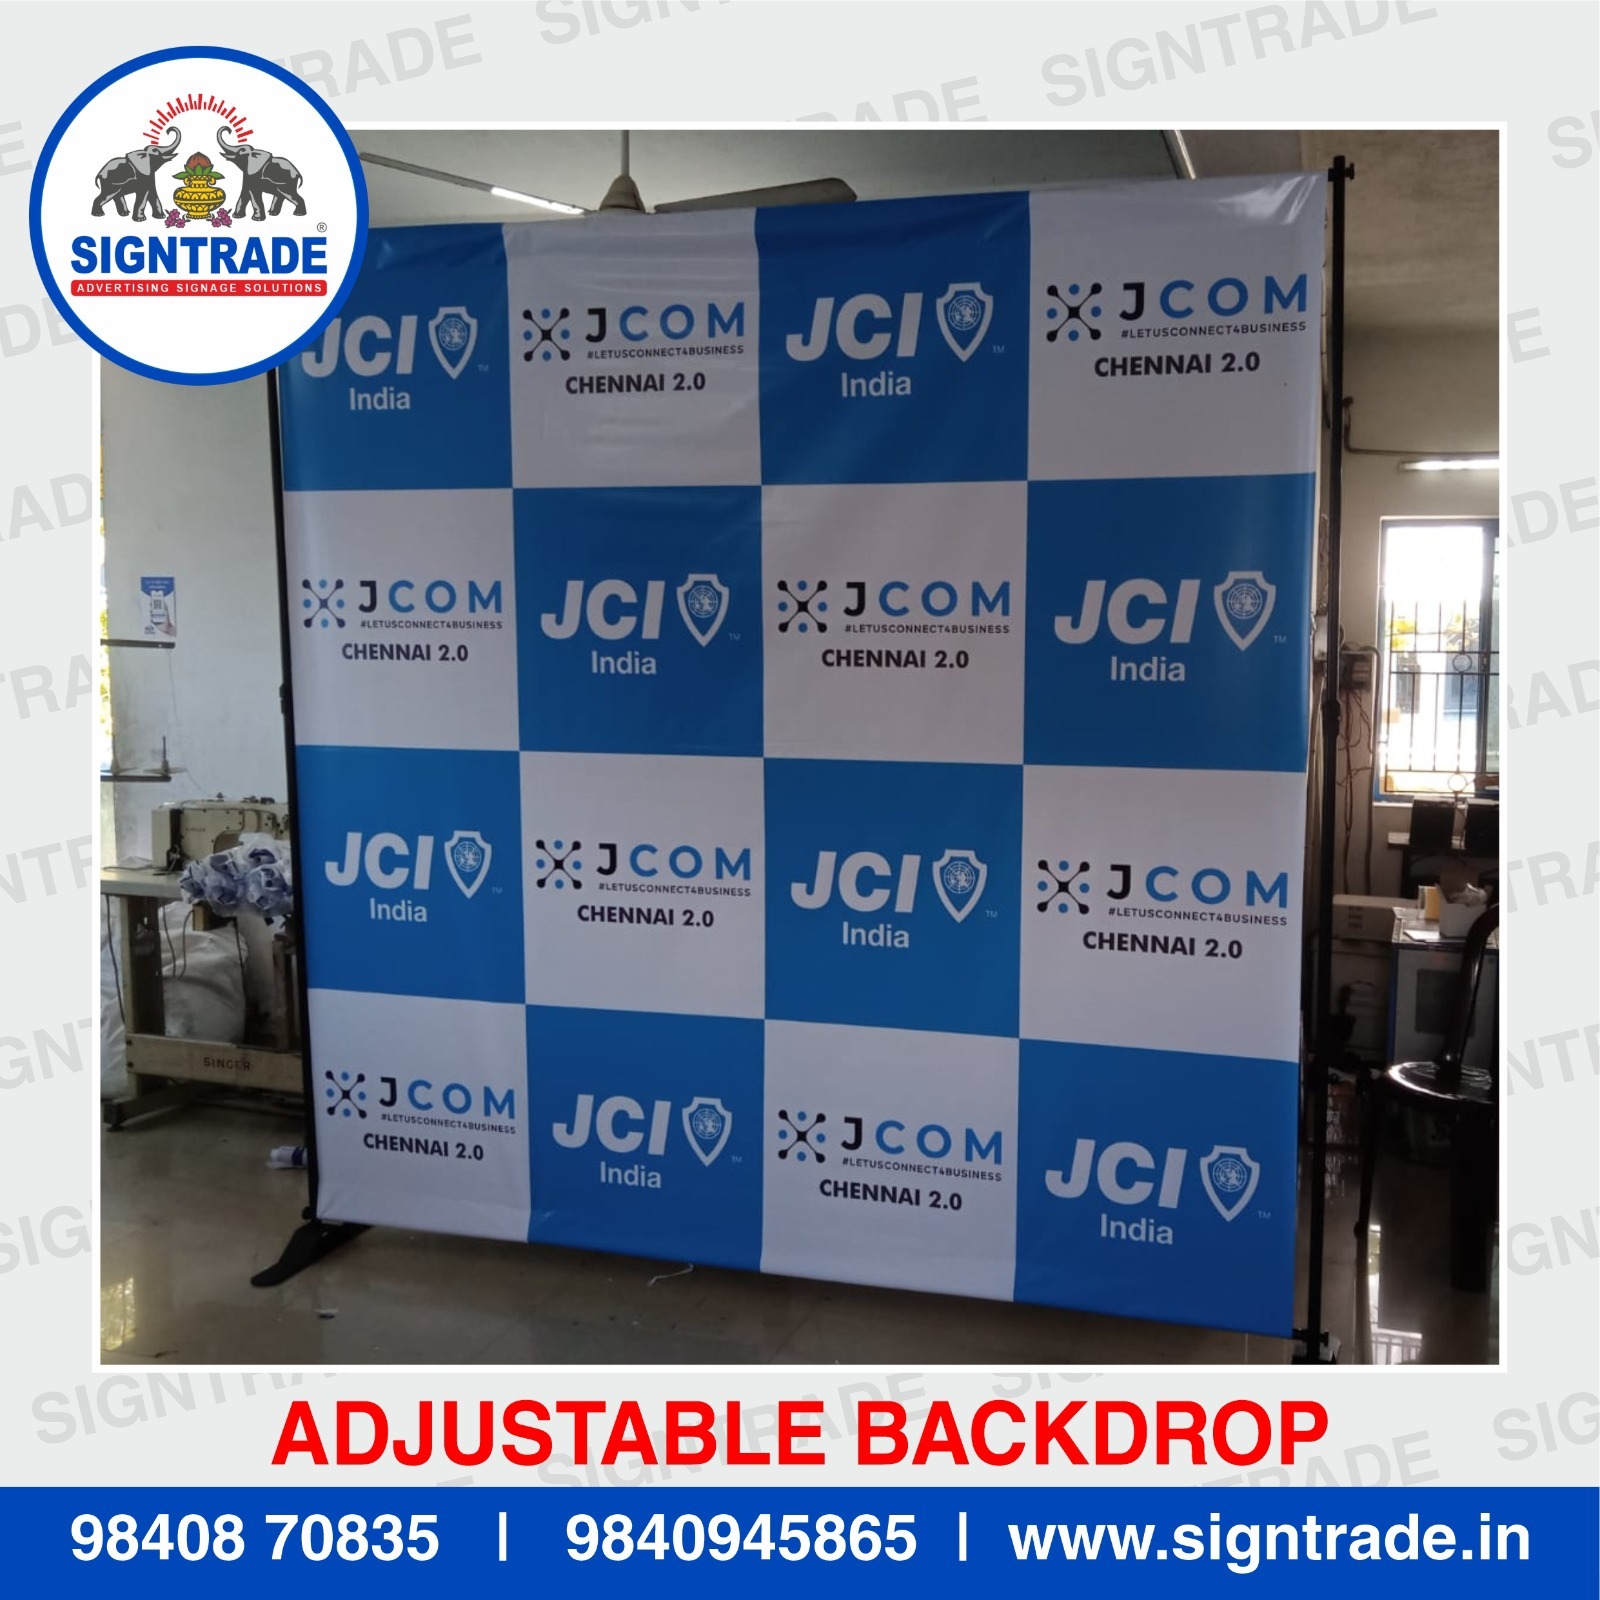 Adjustable Backdrop Stand in Guindy, Chennai